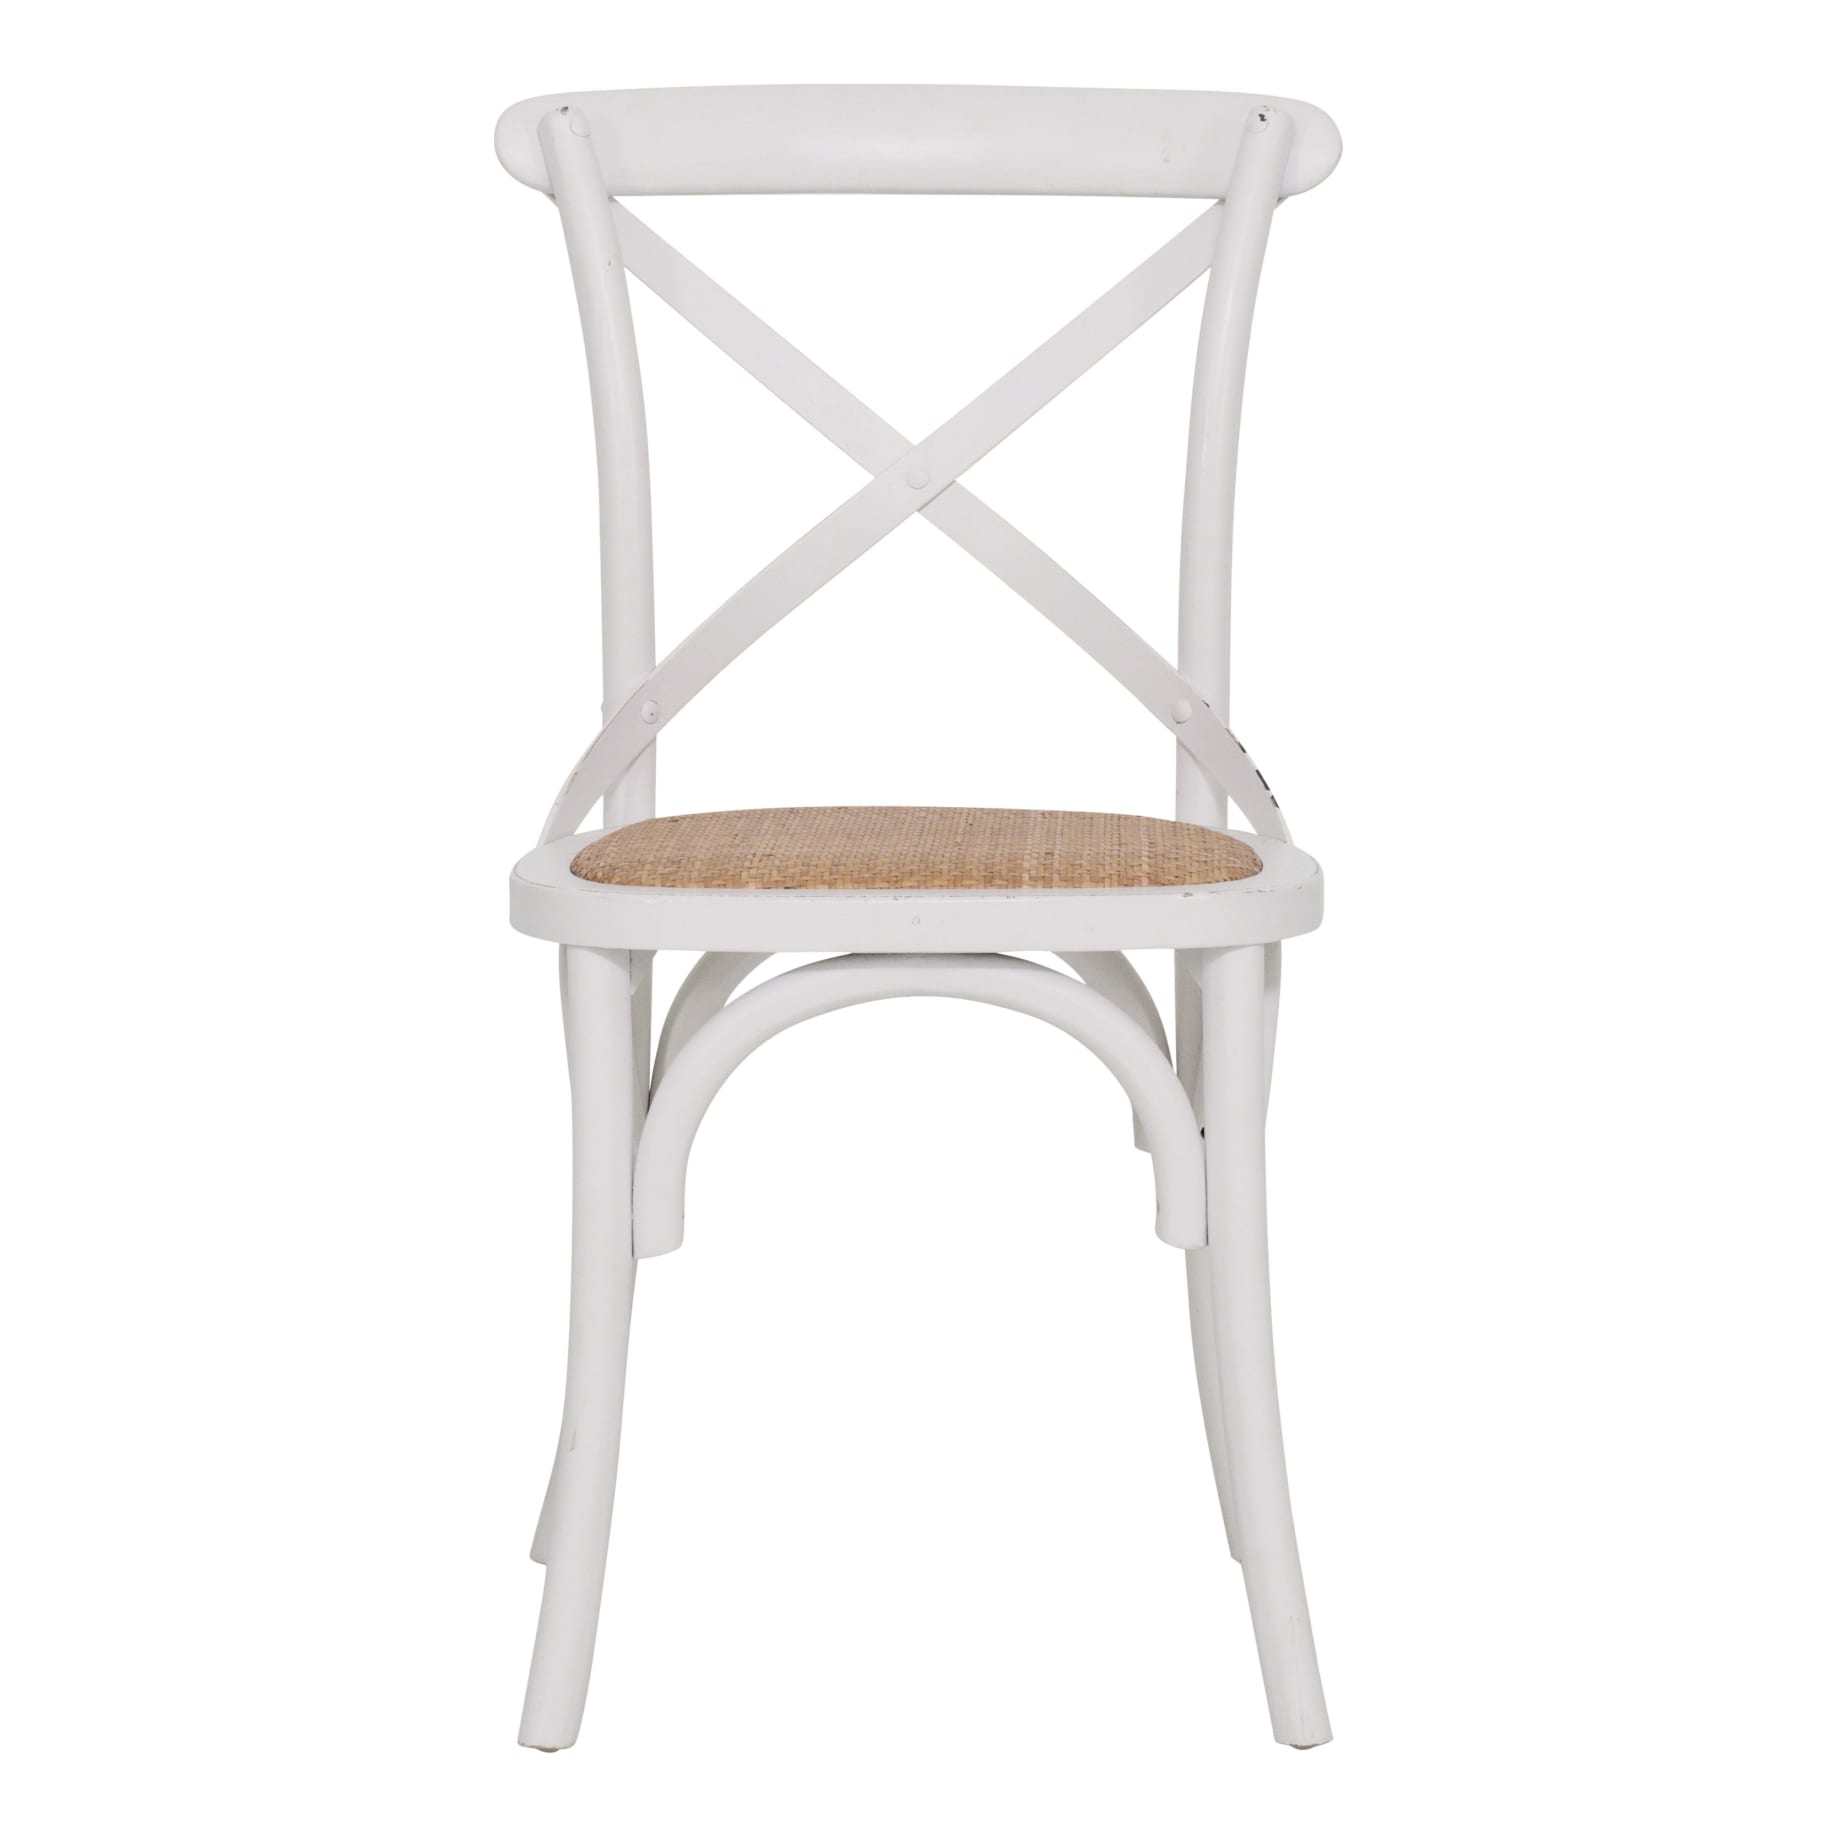 Cristo Cross Back Chair in Weathered White / Rattan